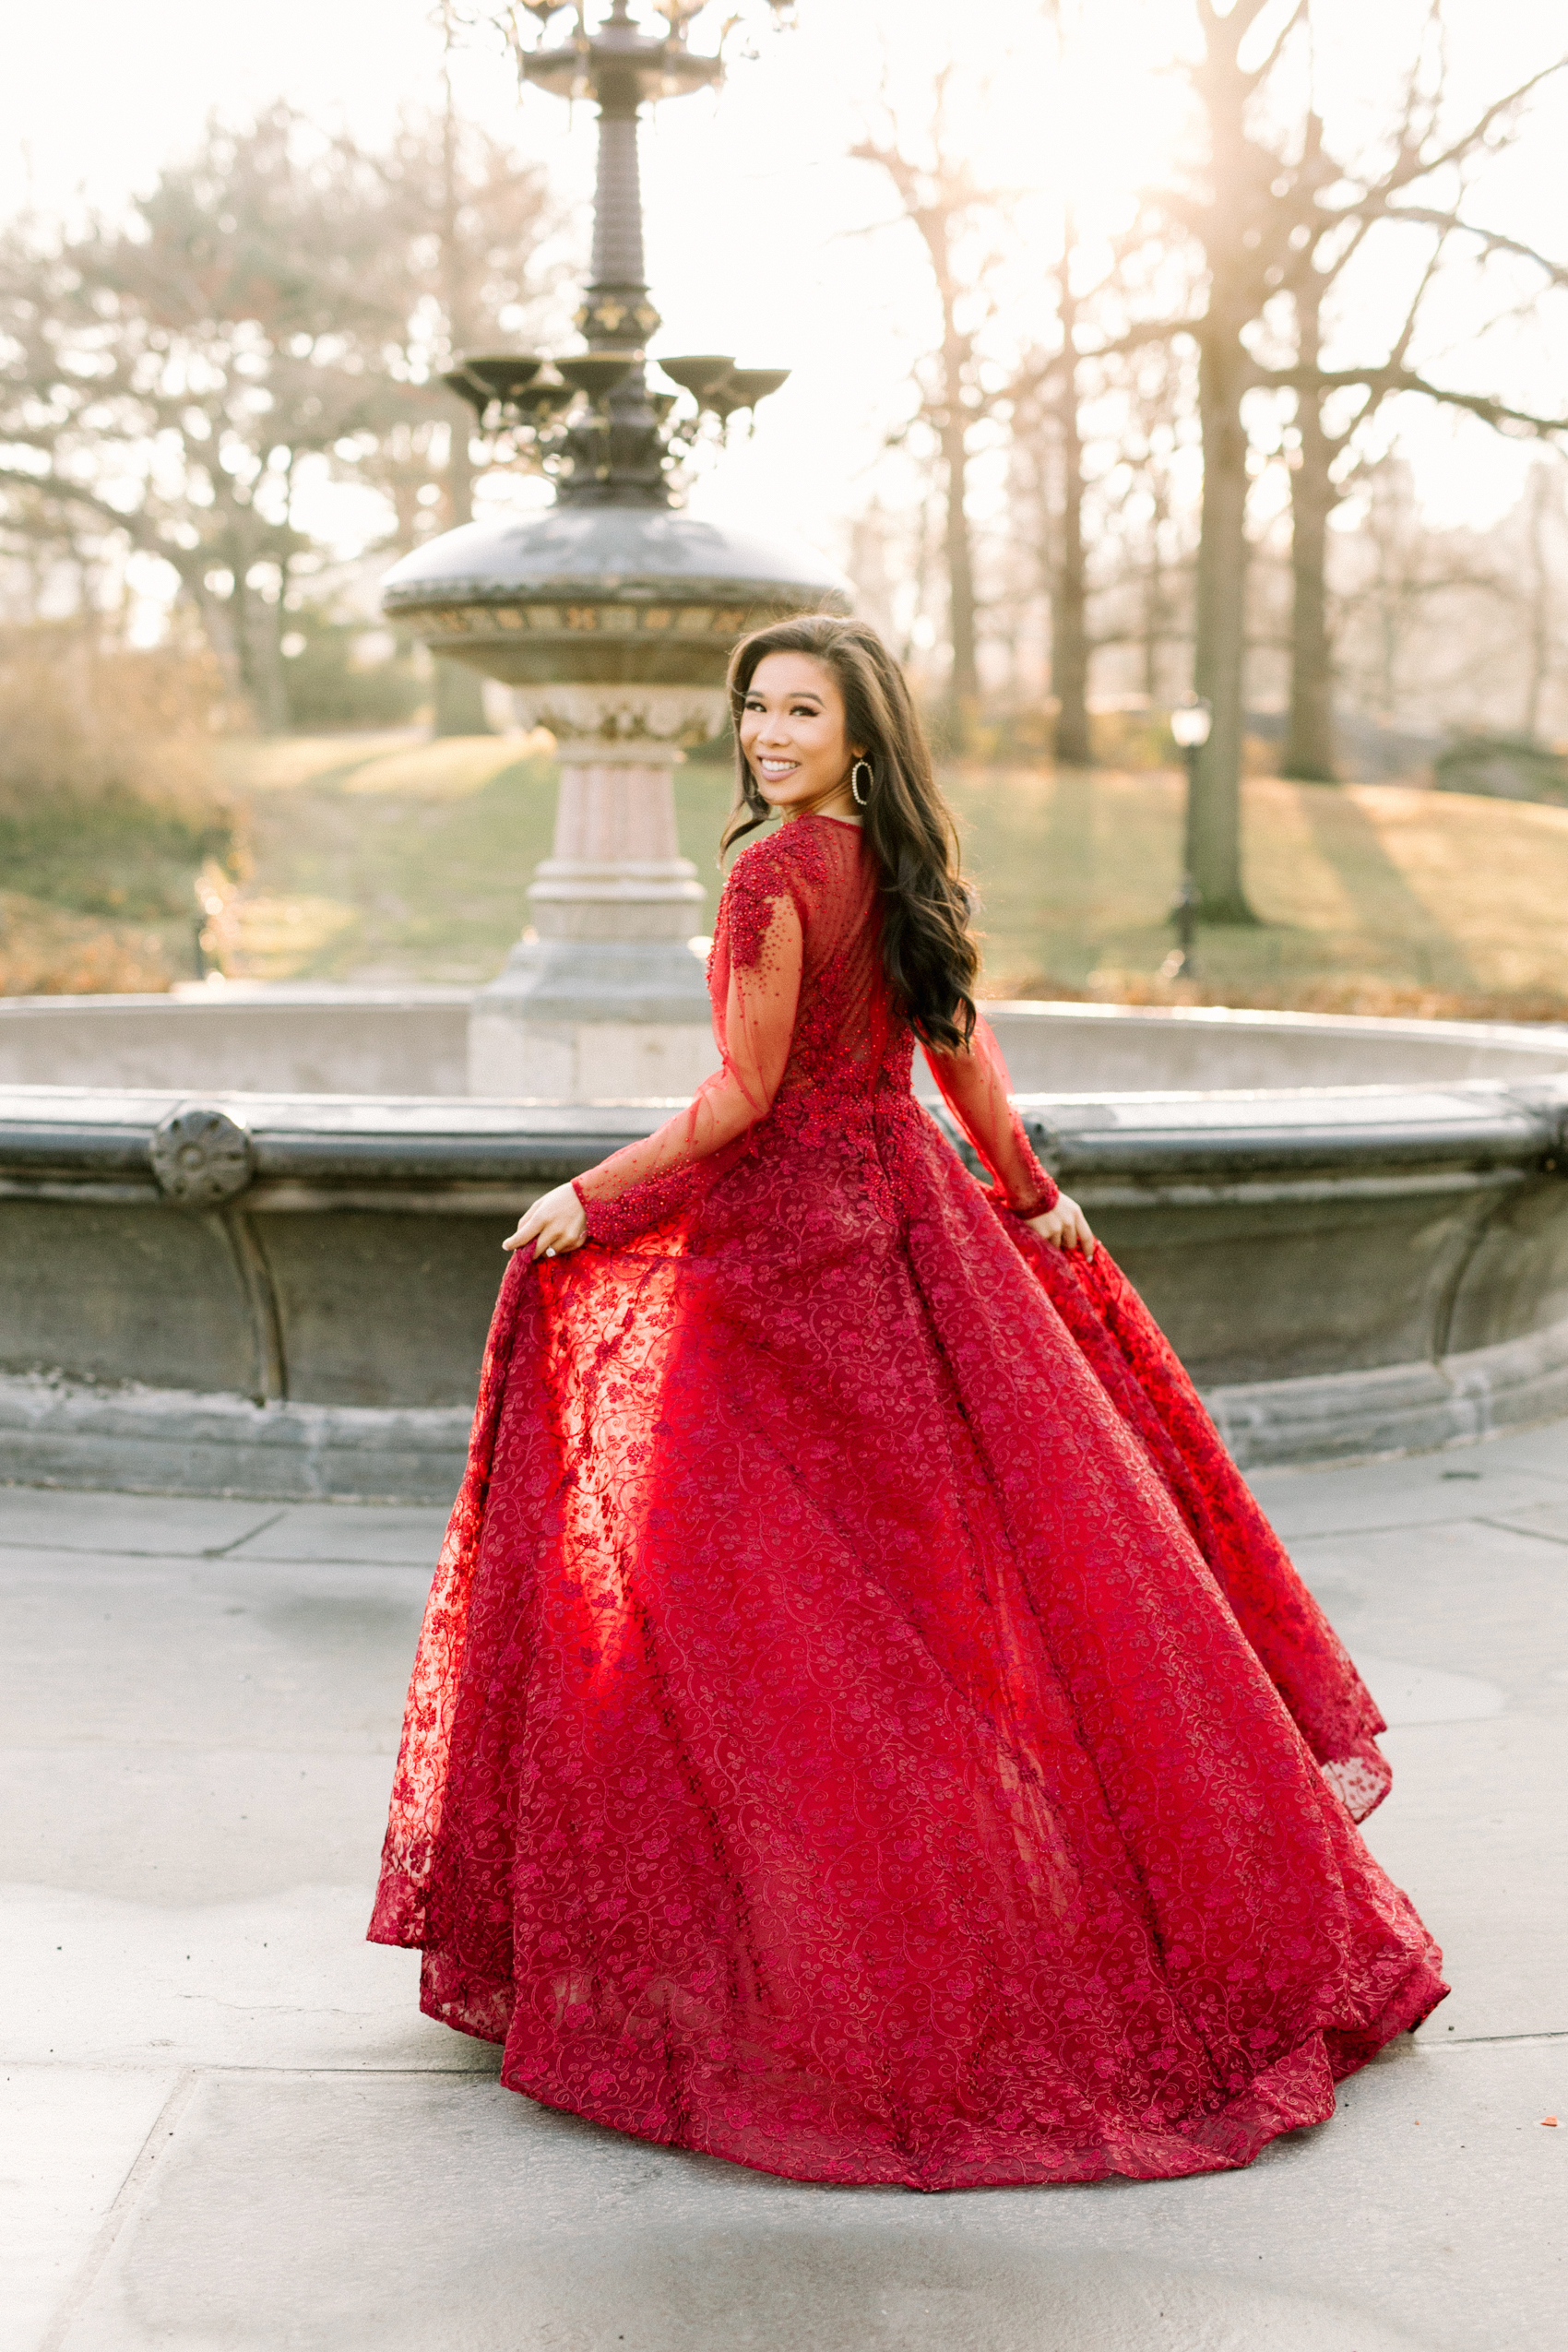 Hoang-Kim Cung wearing a MacDuggal long sleeve illusion gown in red and Kendra Scott Danielle open frame crystal earrings in Central Park for engagement photos